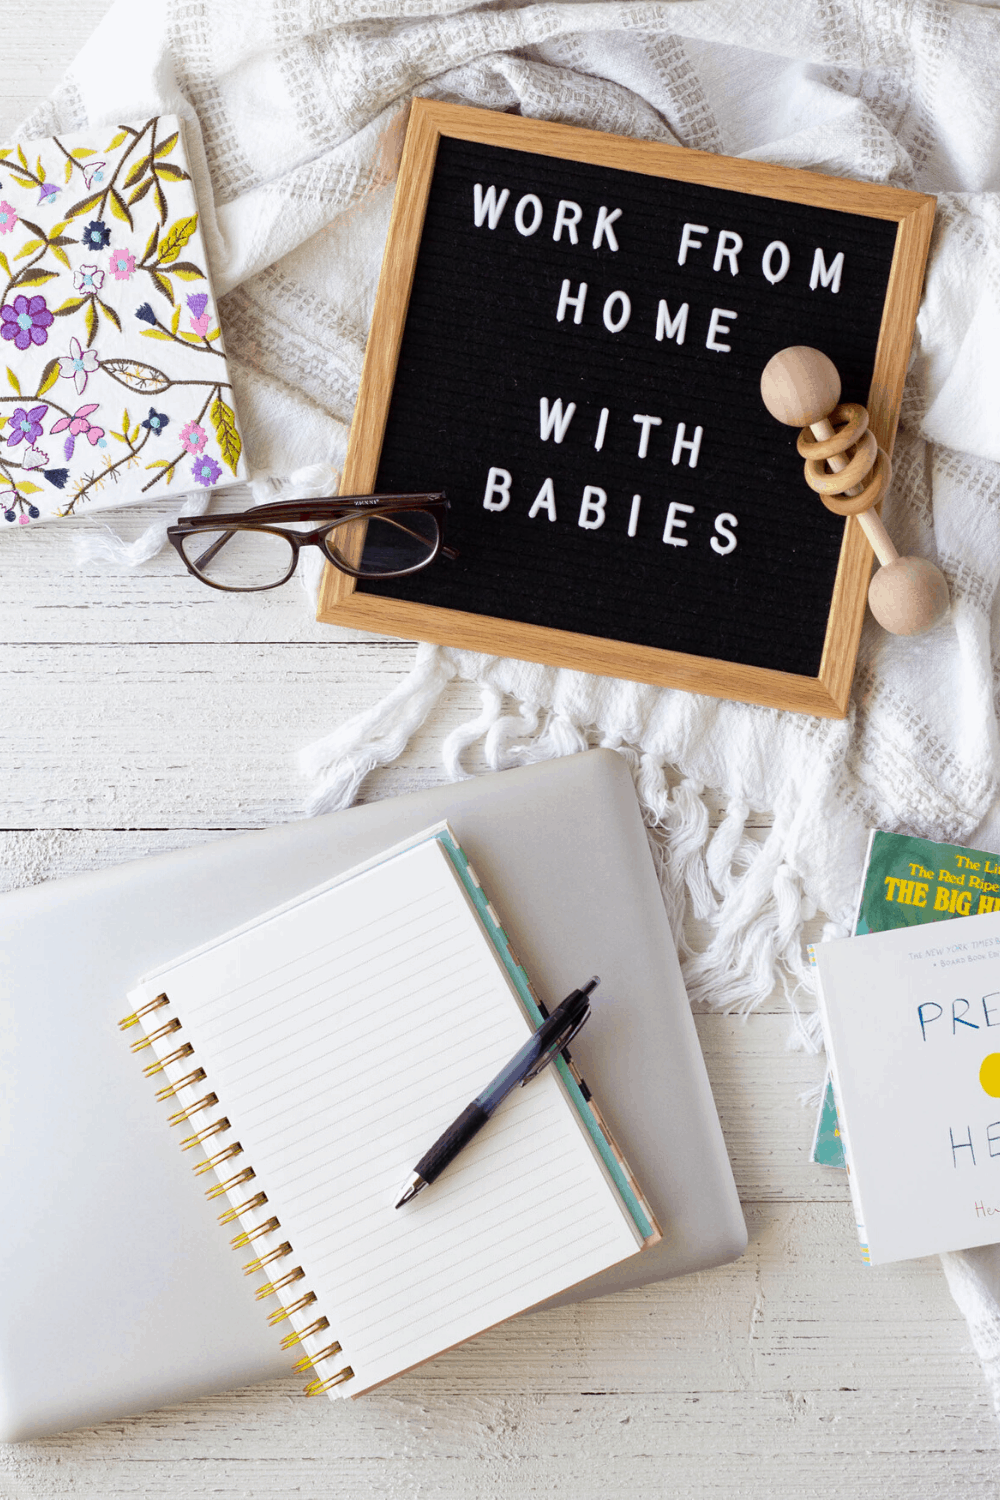 A letterboard with the words “work from home with babies”, a laptop, and notebooks on a wooden surface.